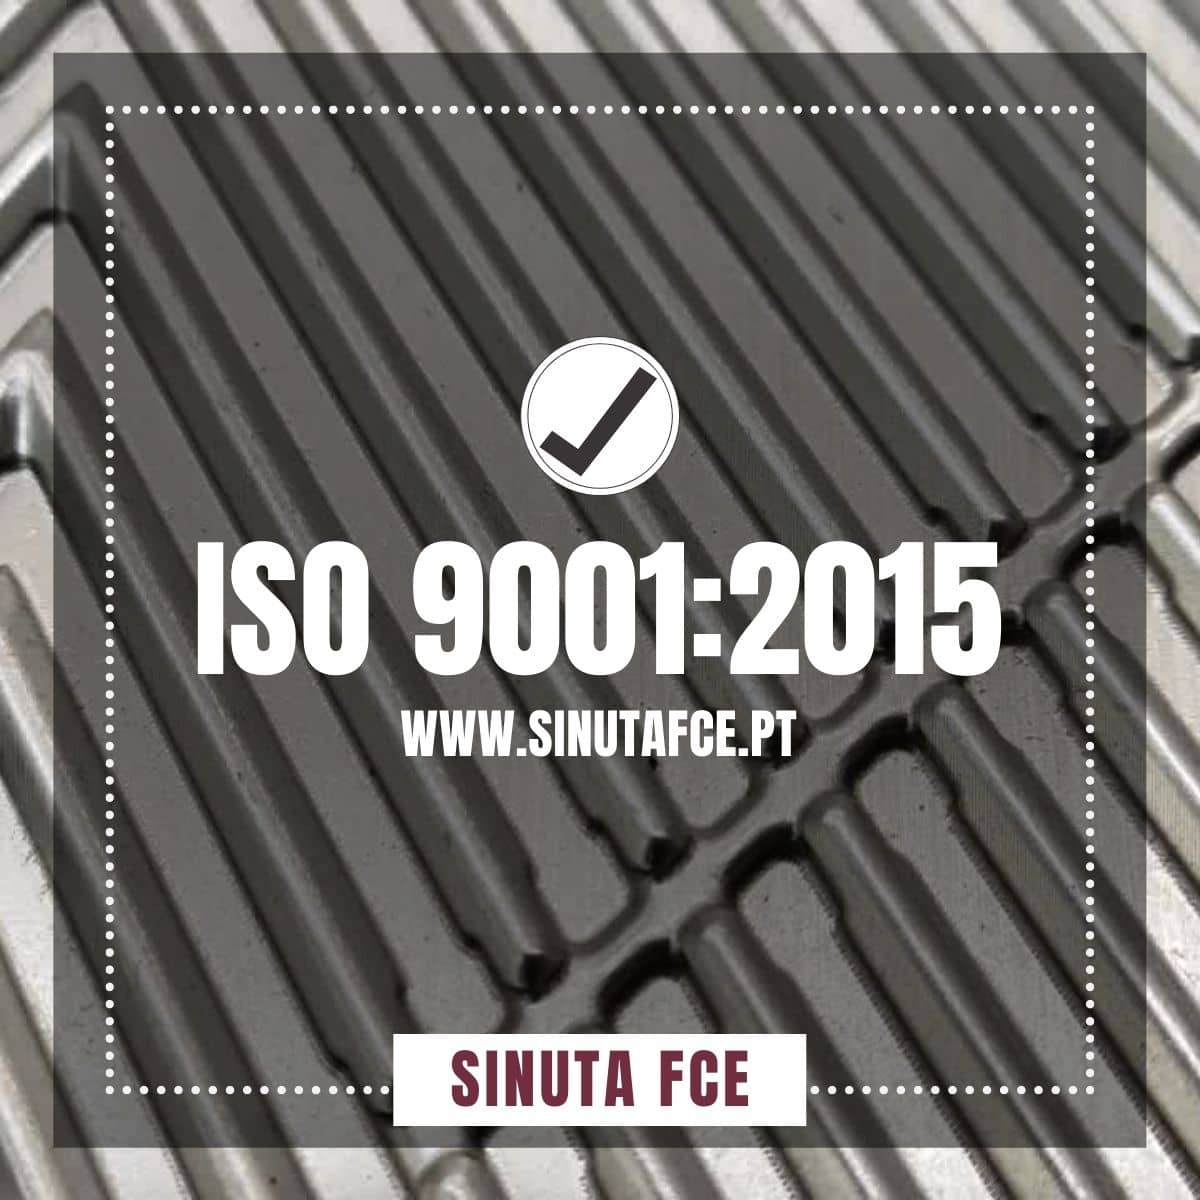 ISO 9001:2015 Quality Certification.